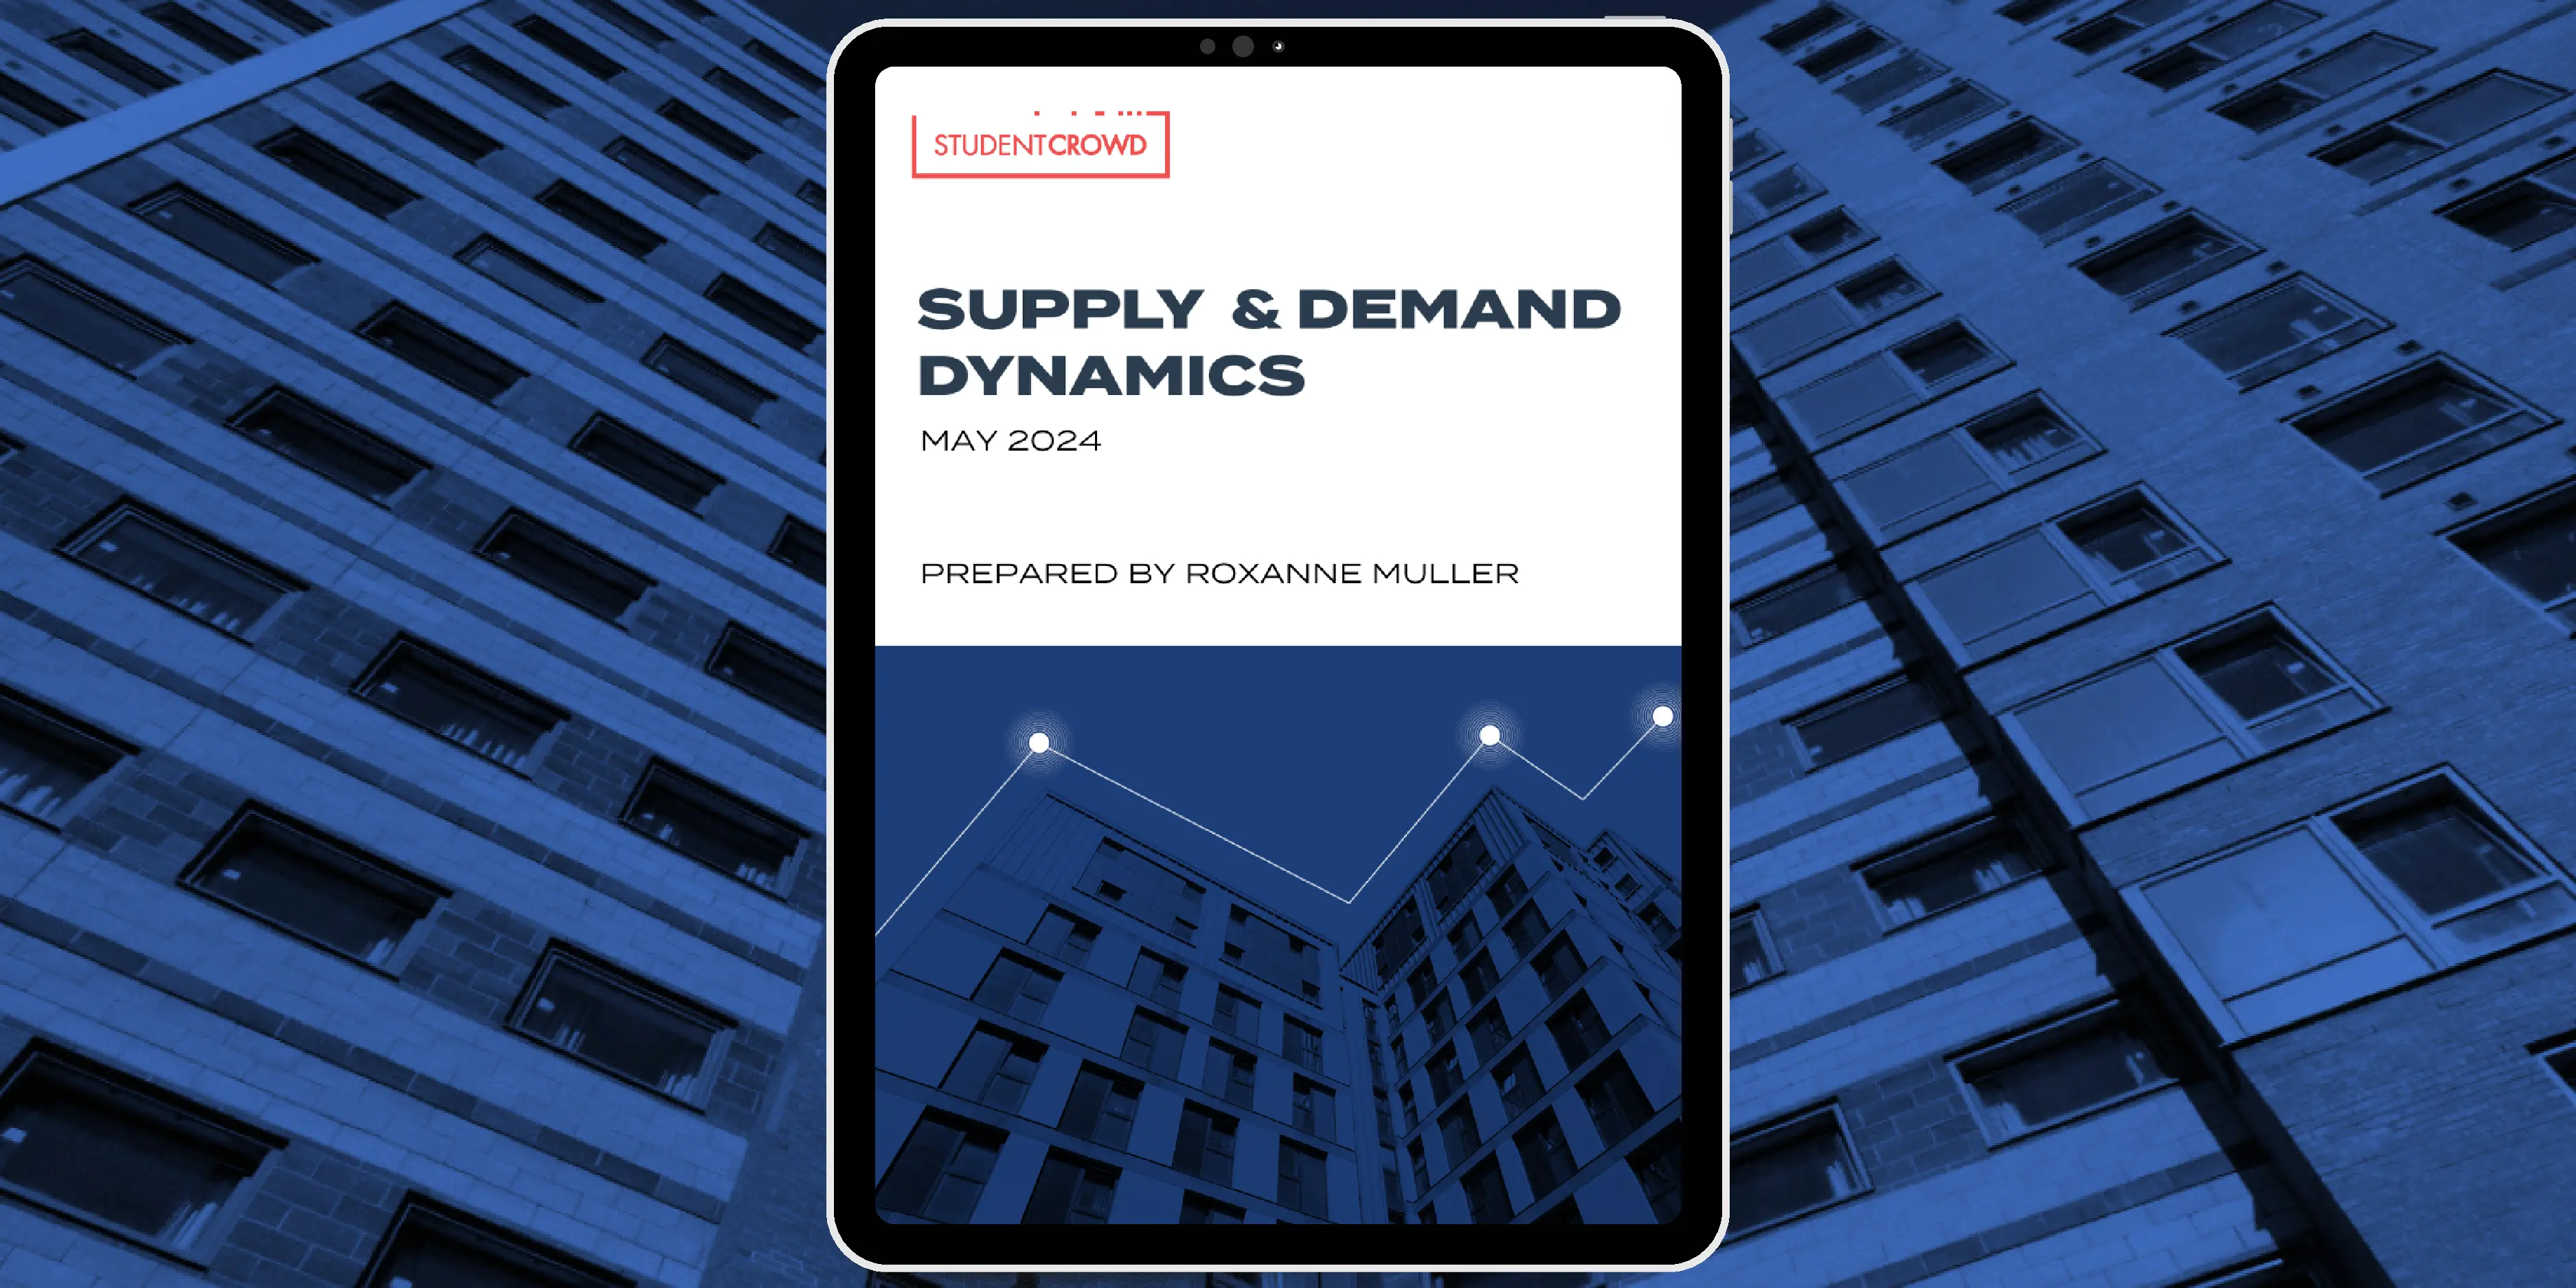 StudentCrowd Student Accommodation Supply and Demand Dynamics report cover displayed on a tablet